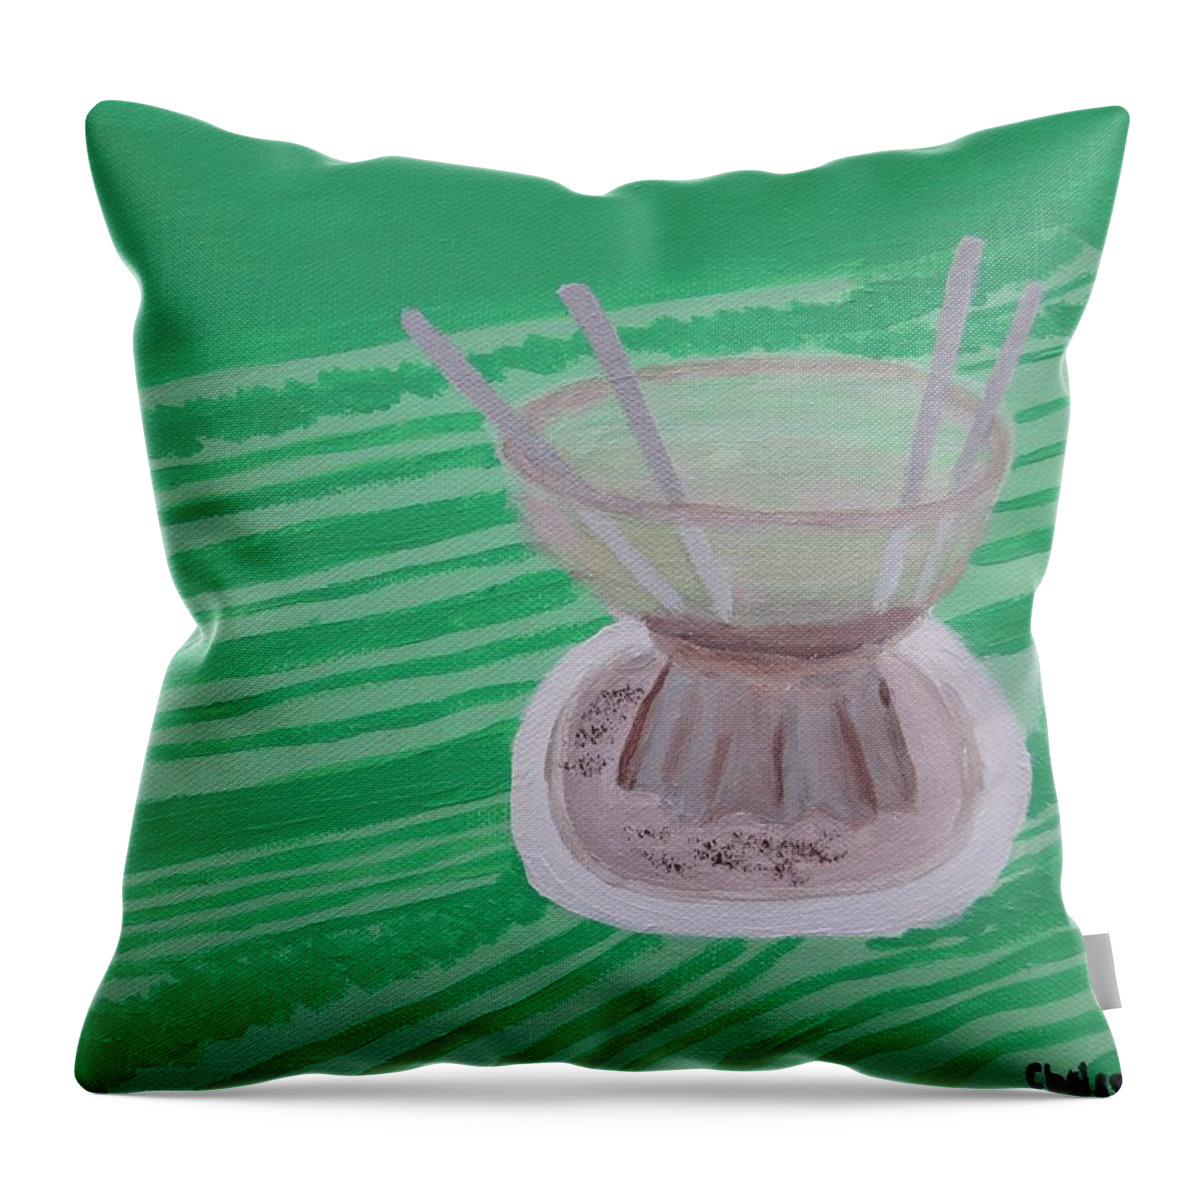  Throw Pillow featuring the painting Serendipity Frozen Hot Chocolate #4 by C E Dill